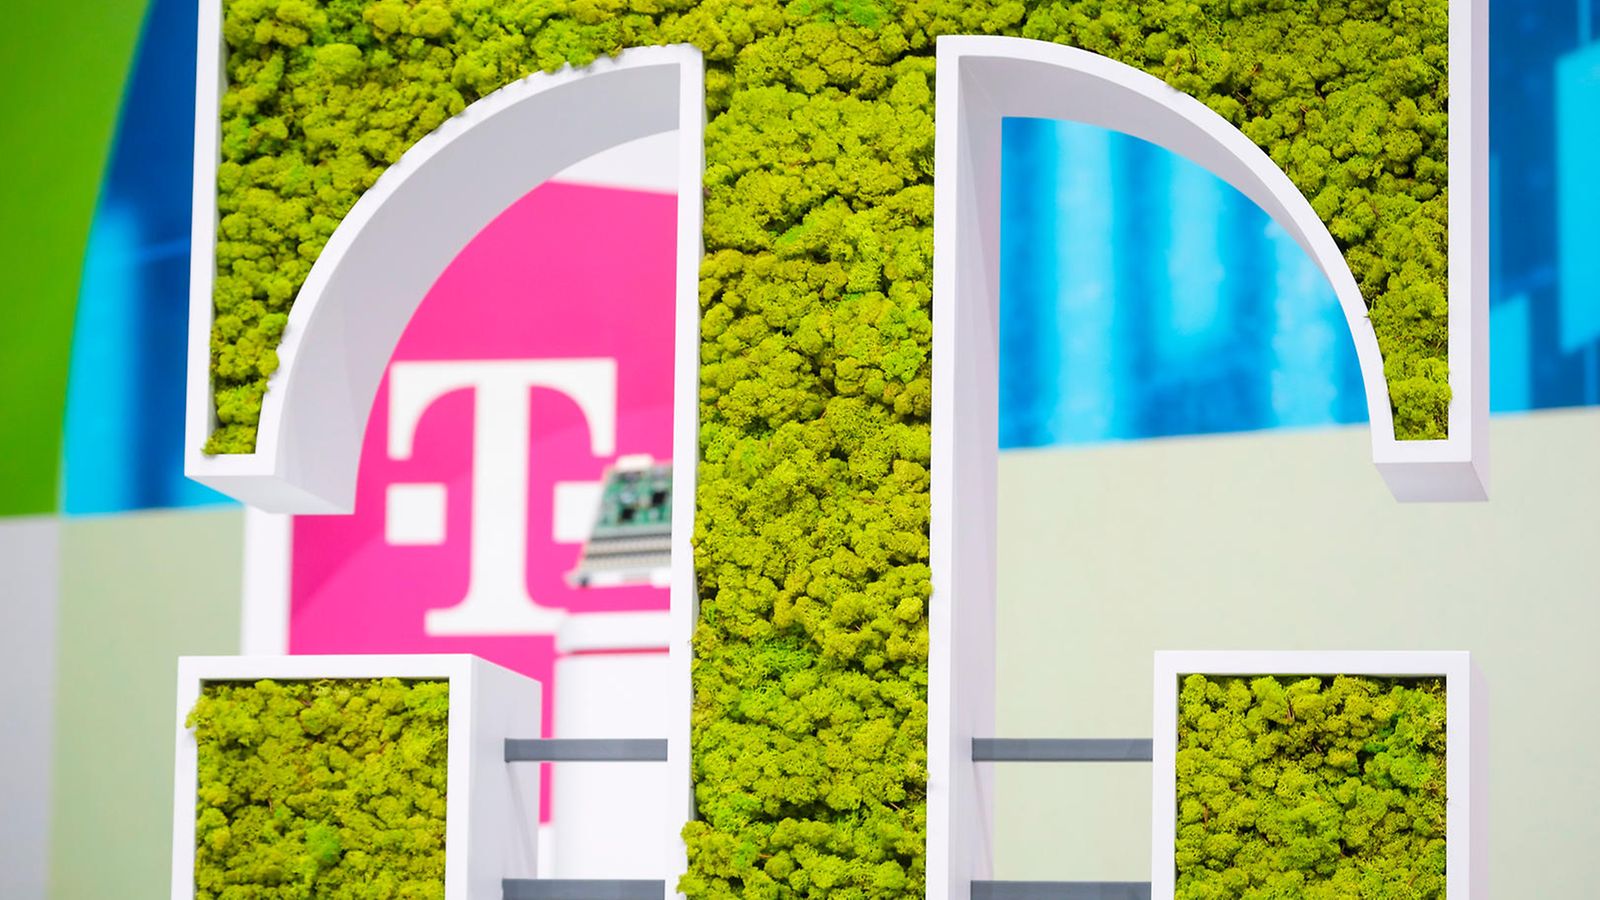 A large green T-logo studded with moss and in the background the T-logo on magenta background